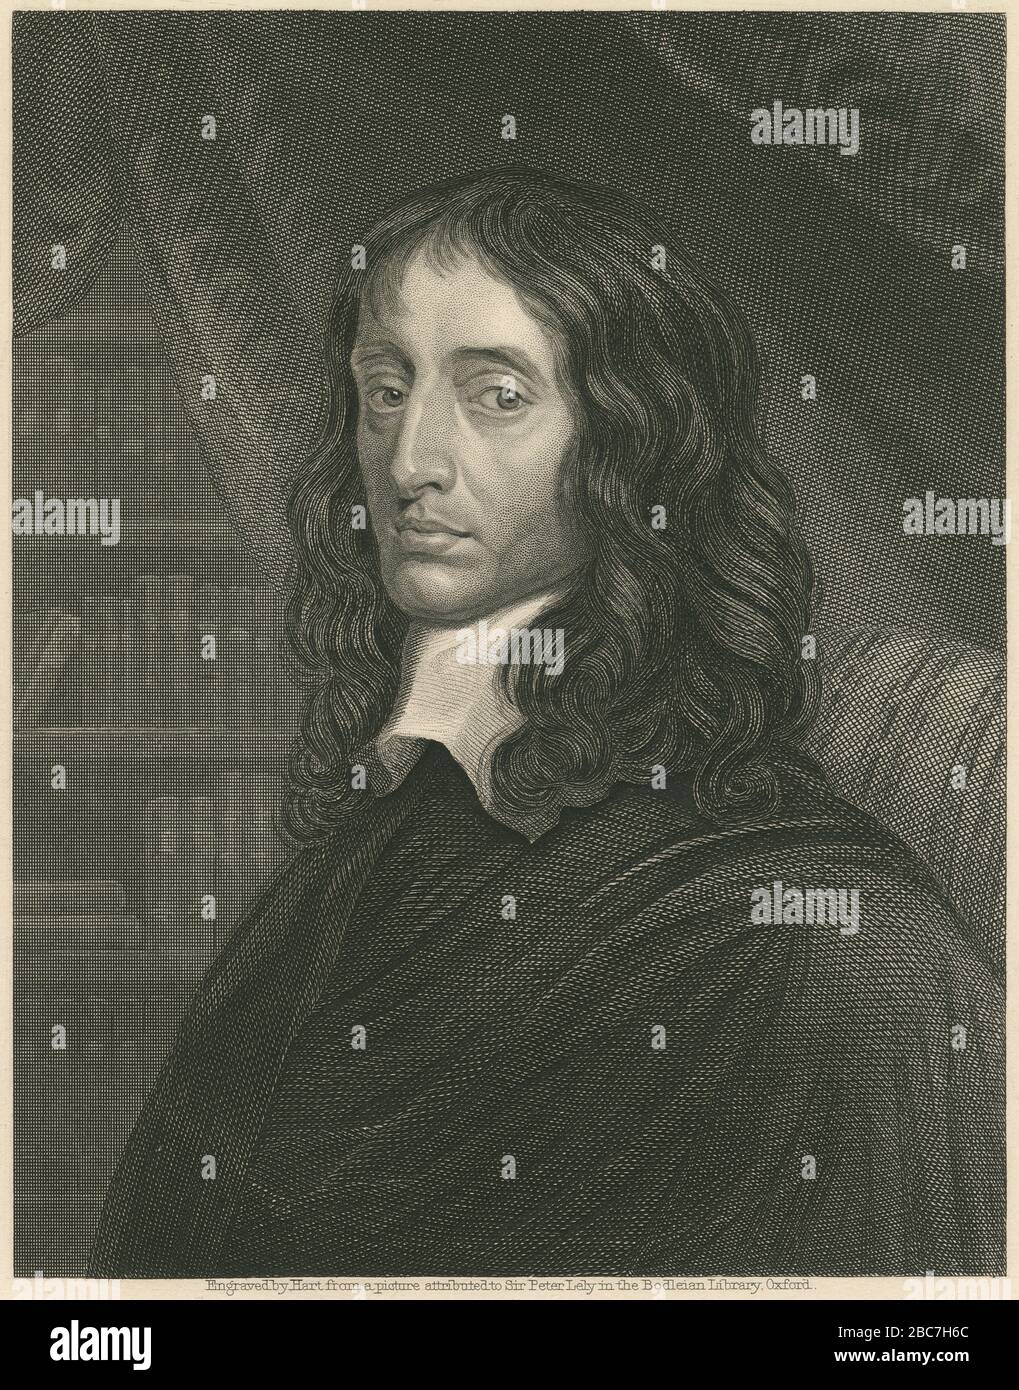 Antique engraving, John Selden. John Selden (1584-1654) was an English jurist, a scholar of England's ancient laws and constitution and scholar of Jewish law. SOURCE: ORIGINAL ENGRAVING Stock Photo